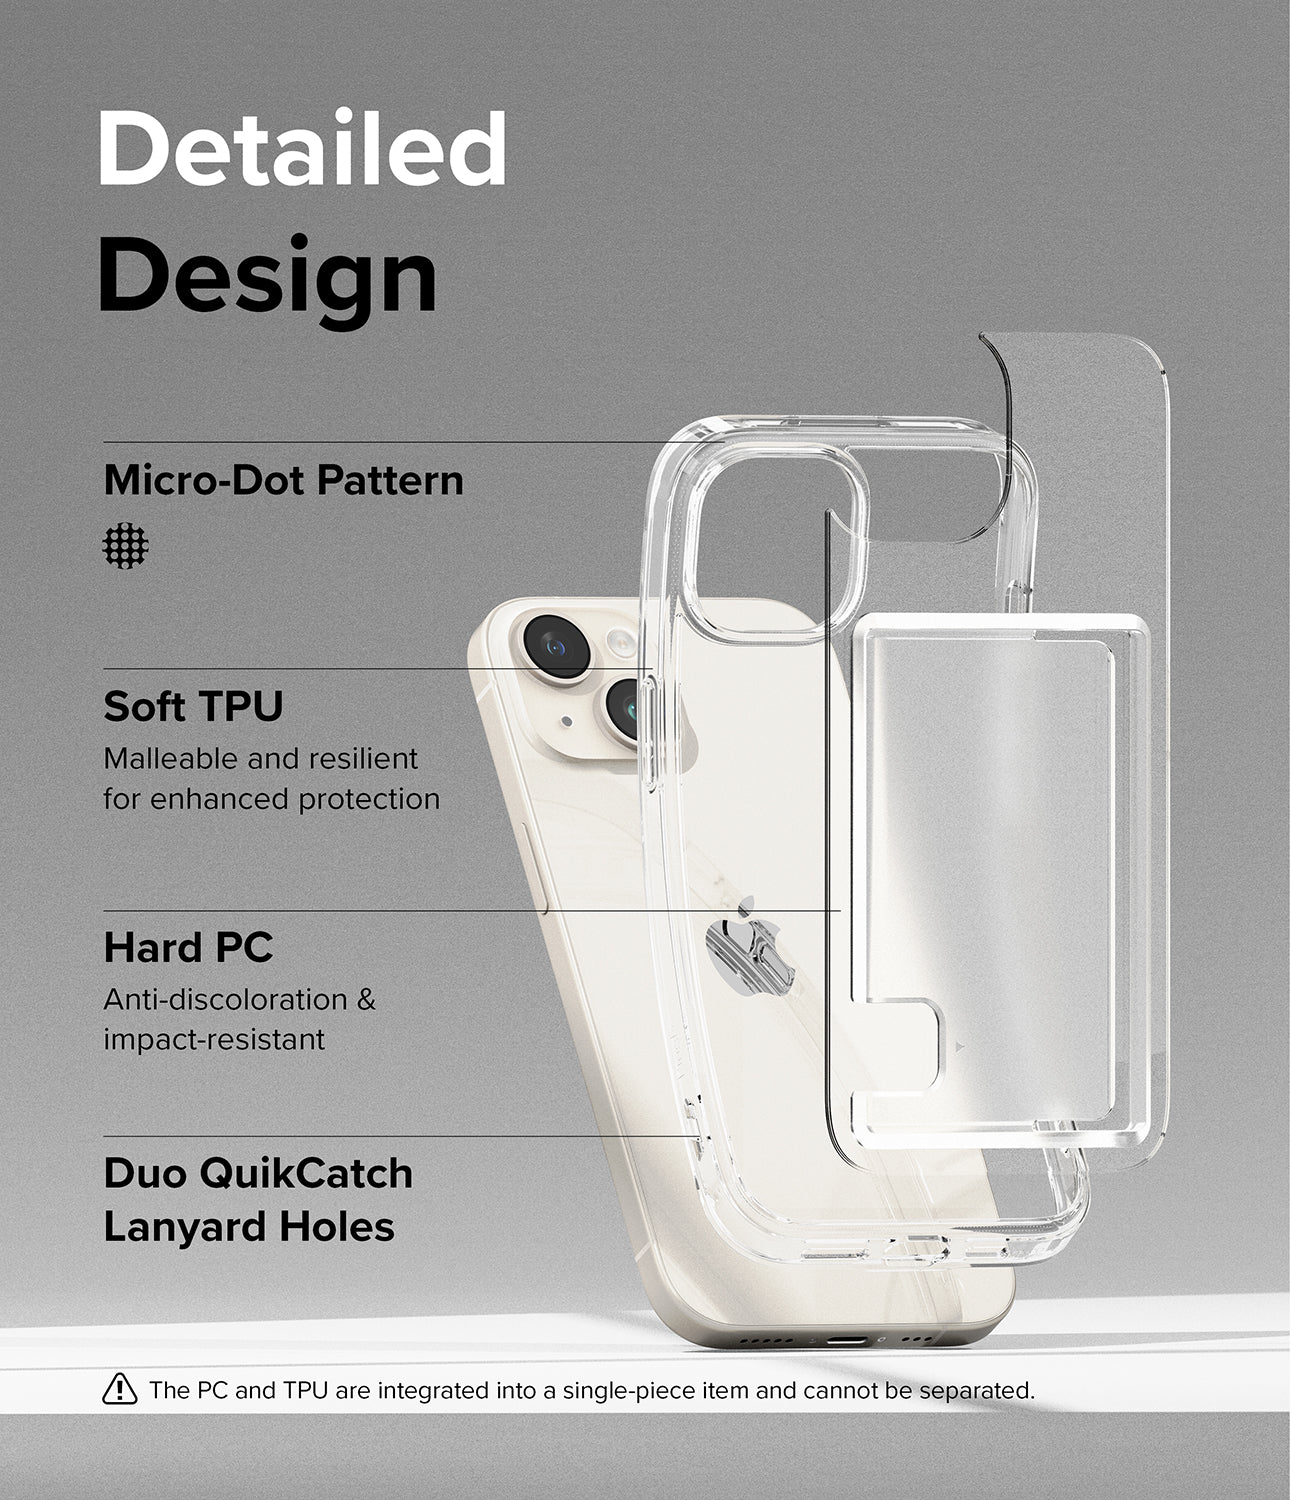 iPhone 15 Case | Fusion Card - Detailed Design. Micro-Dot Pattern. Malleable and resilient for enhanced protection with Soft TPU. Anti-discoloration and impact-resistant with Hard PC. Duo QuikCatch Lanyard Holes.